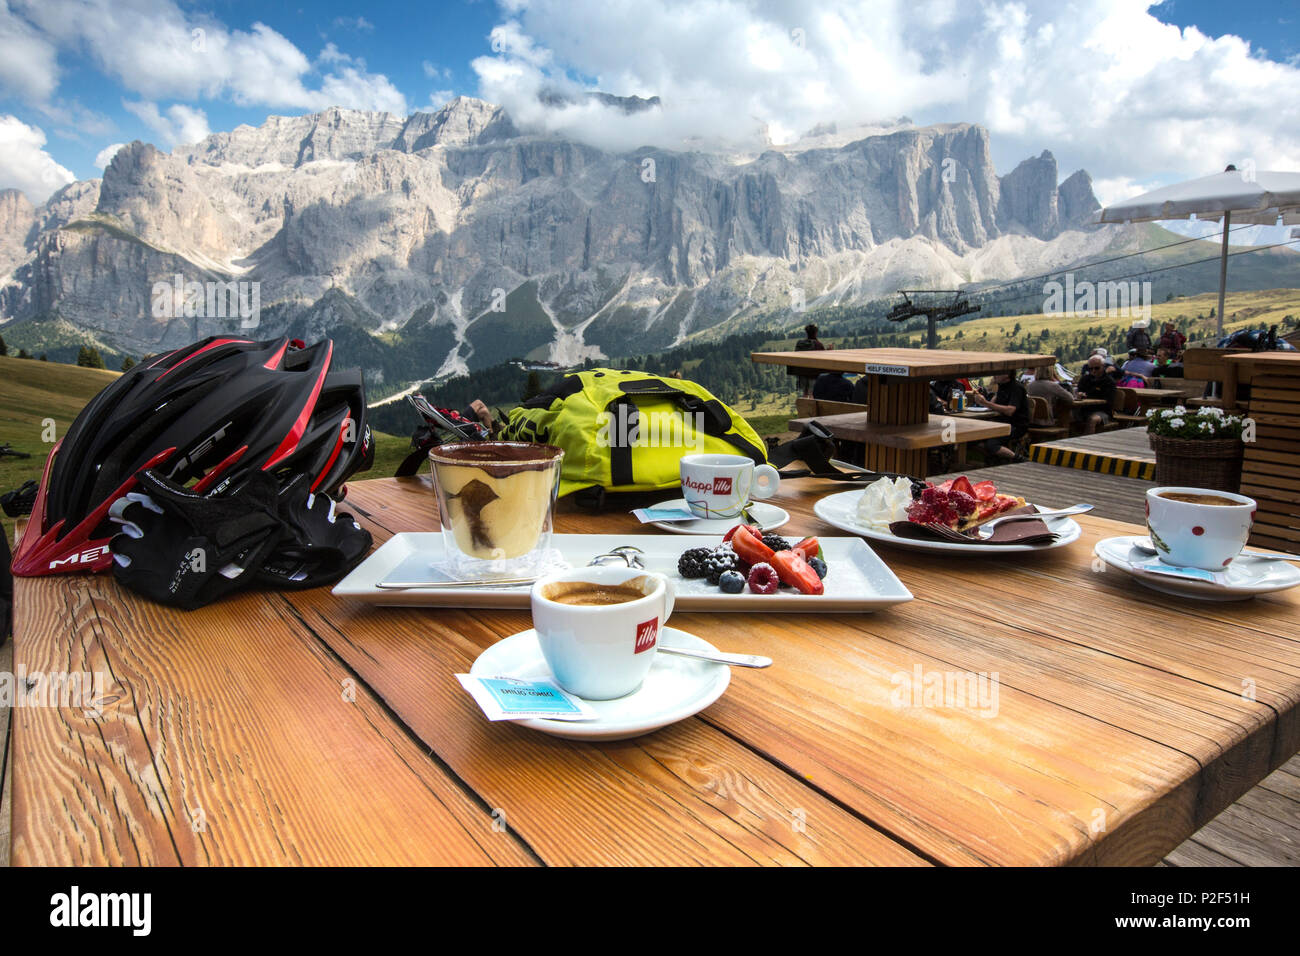 Dessert with espresso at the Emilio Comici hut at Langkofel, behind it Sella group, Trentino South Tyrol, Italy Stock Photo